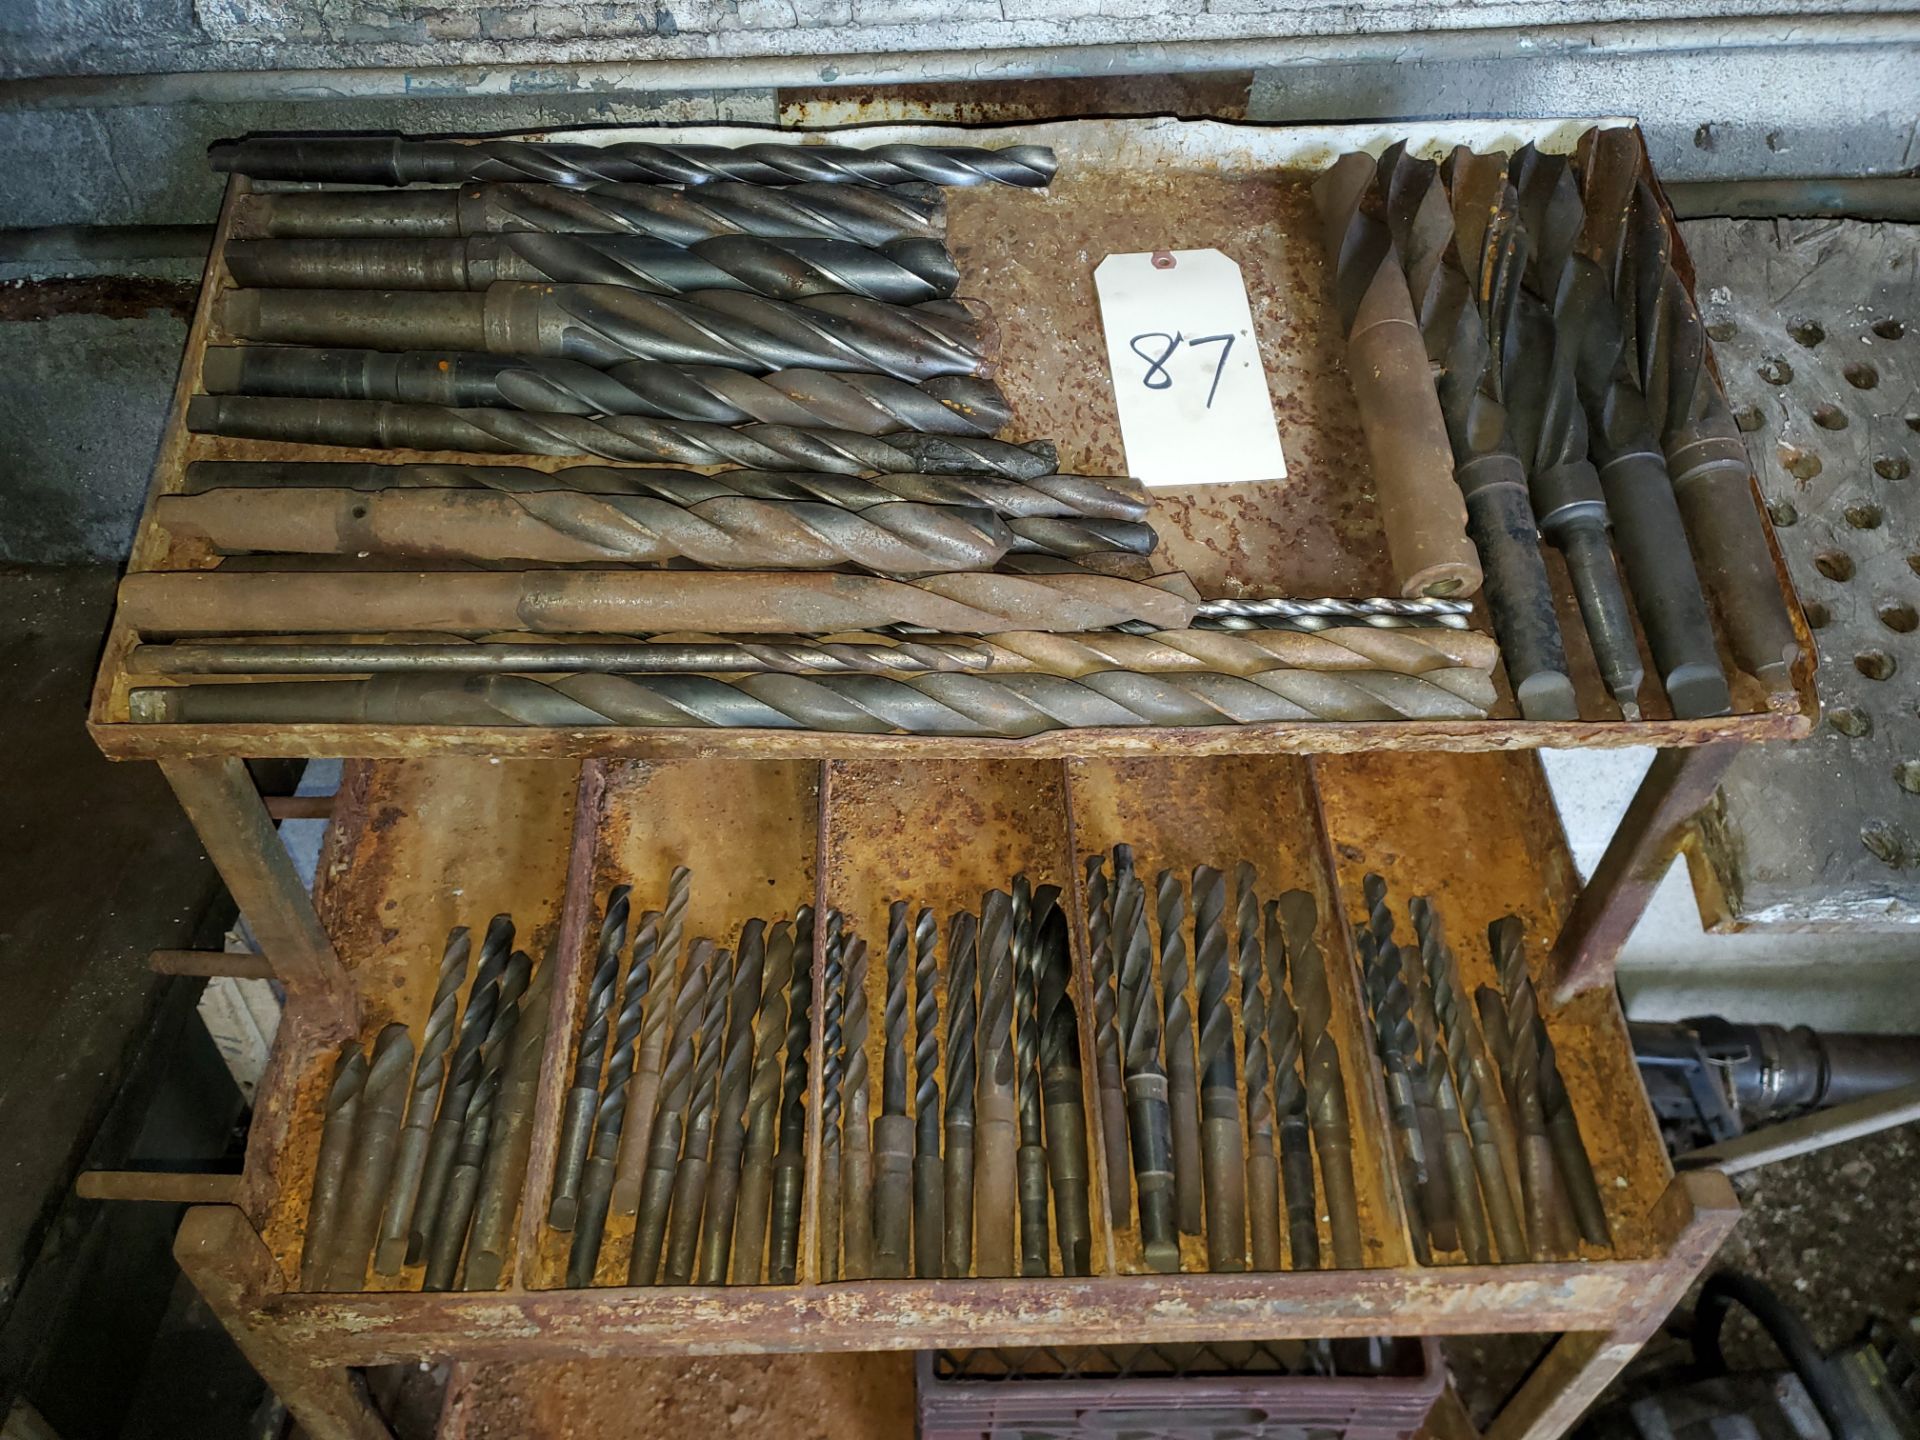 Lot of Assorted Drills